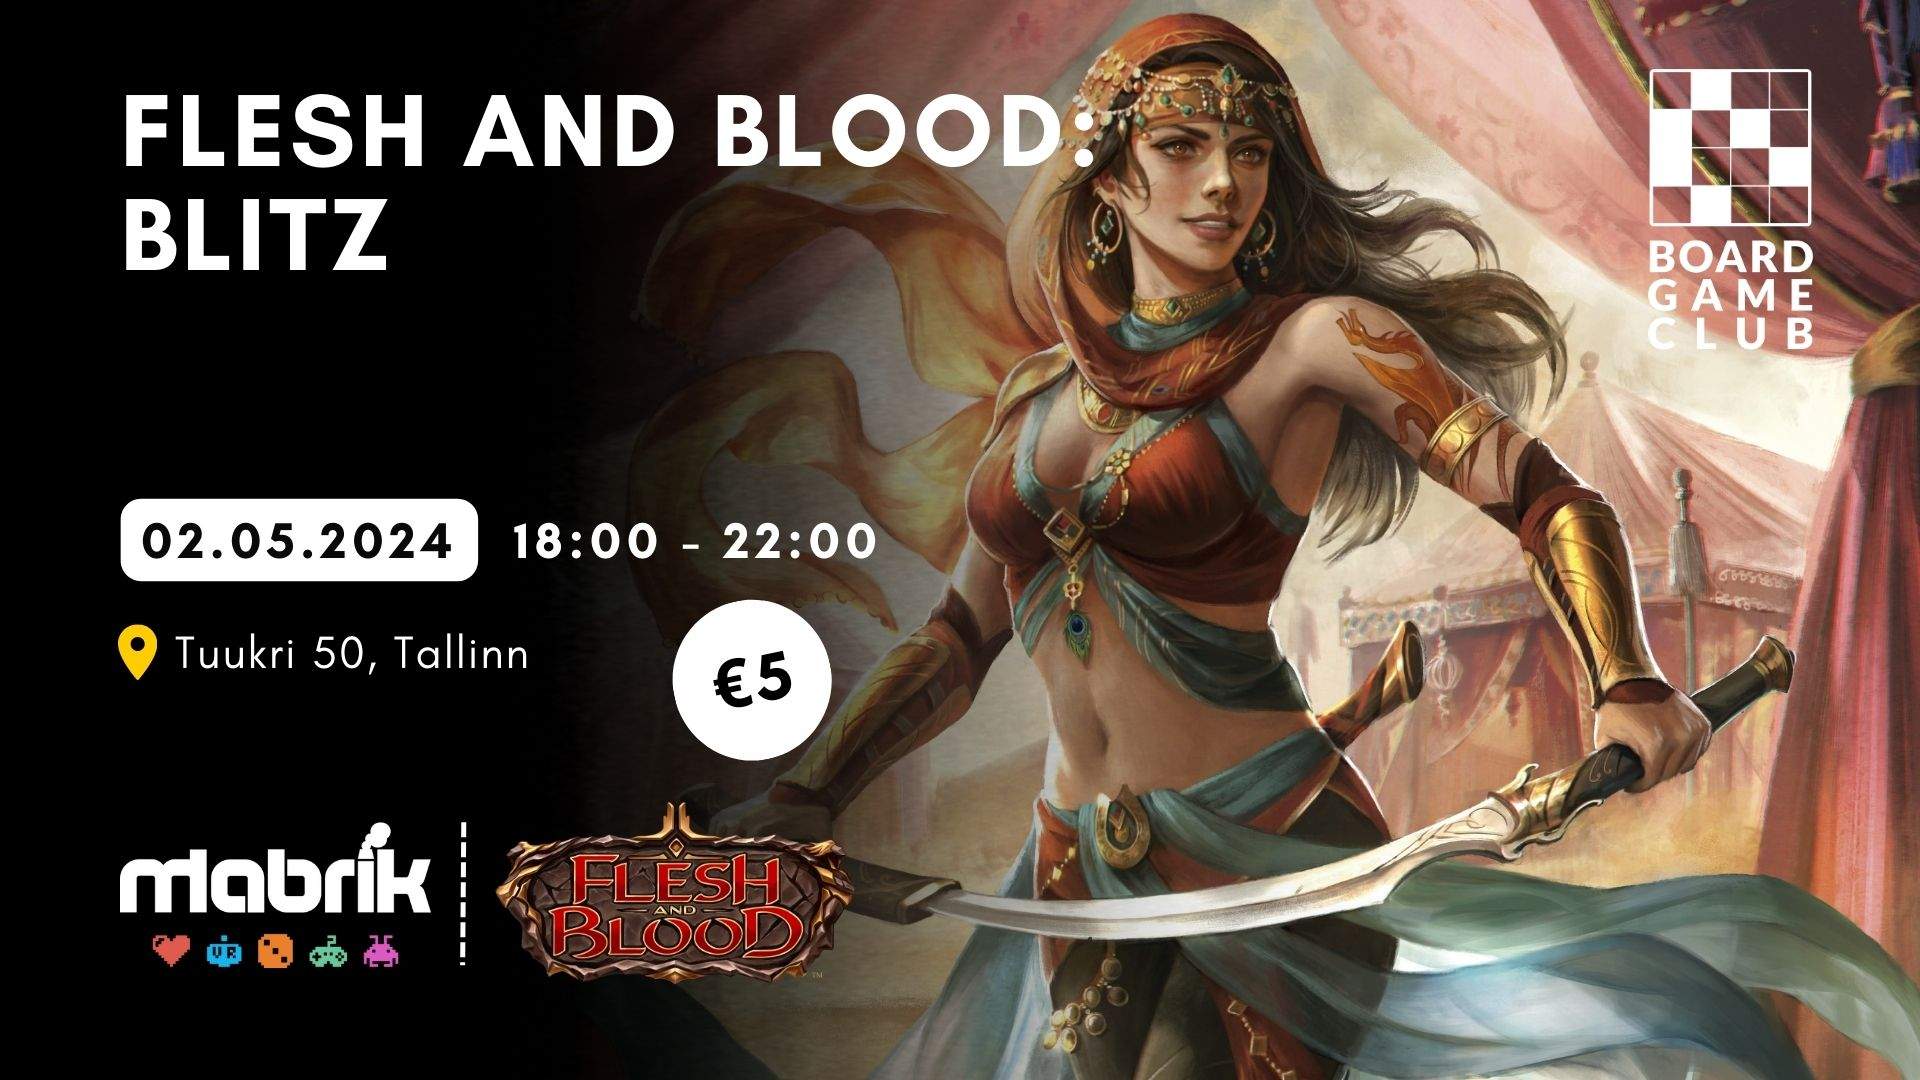 Events - 04.04.2024 - Flesh and Blood - Blitz